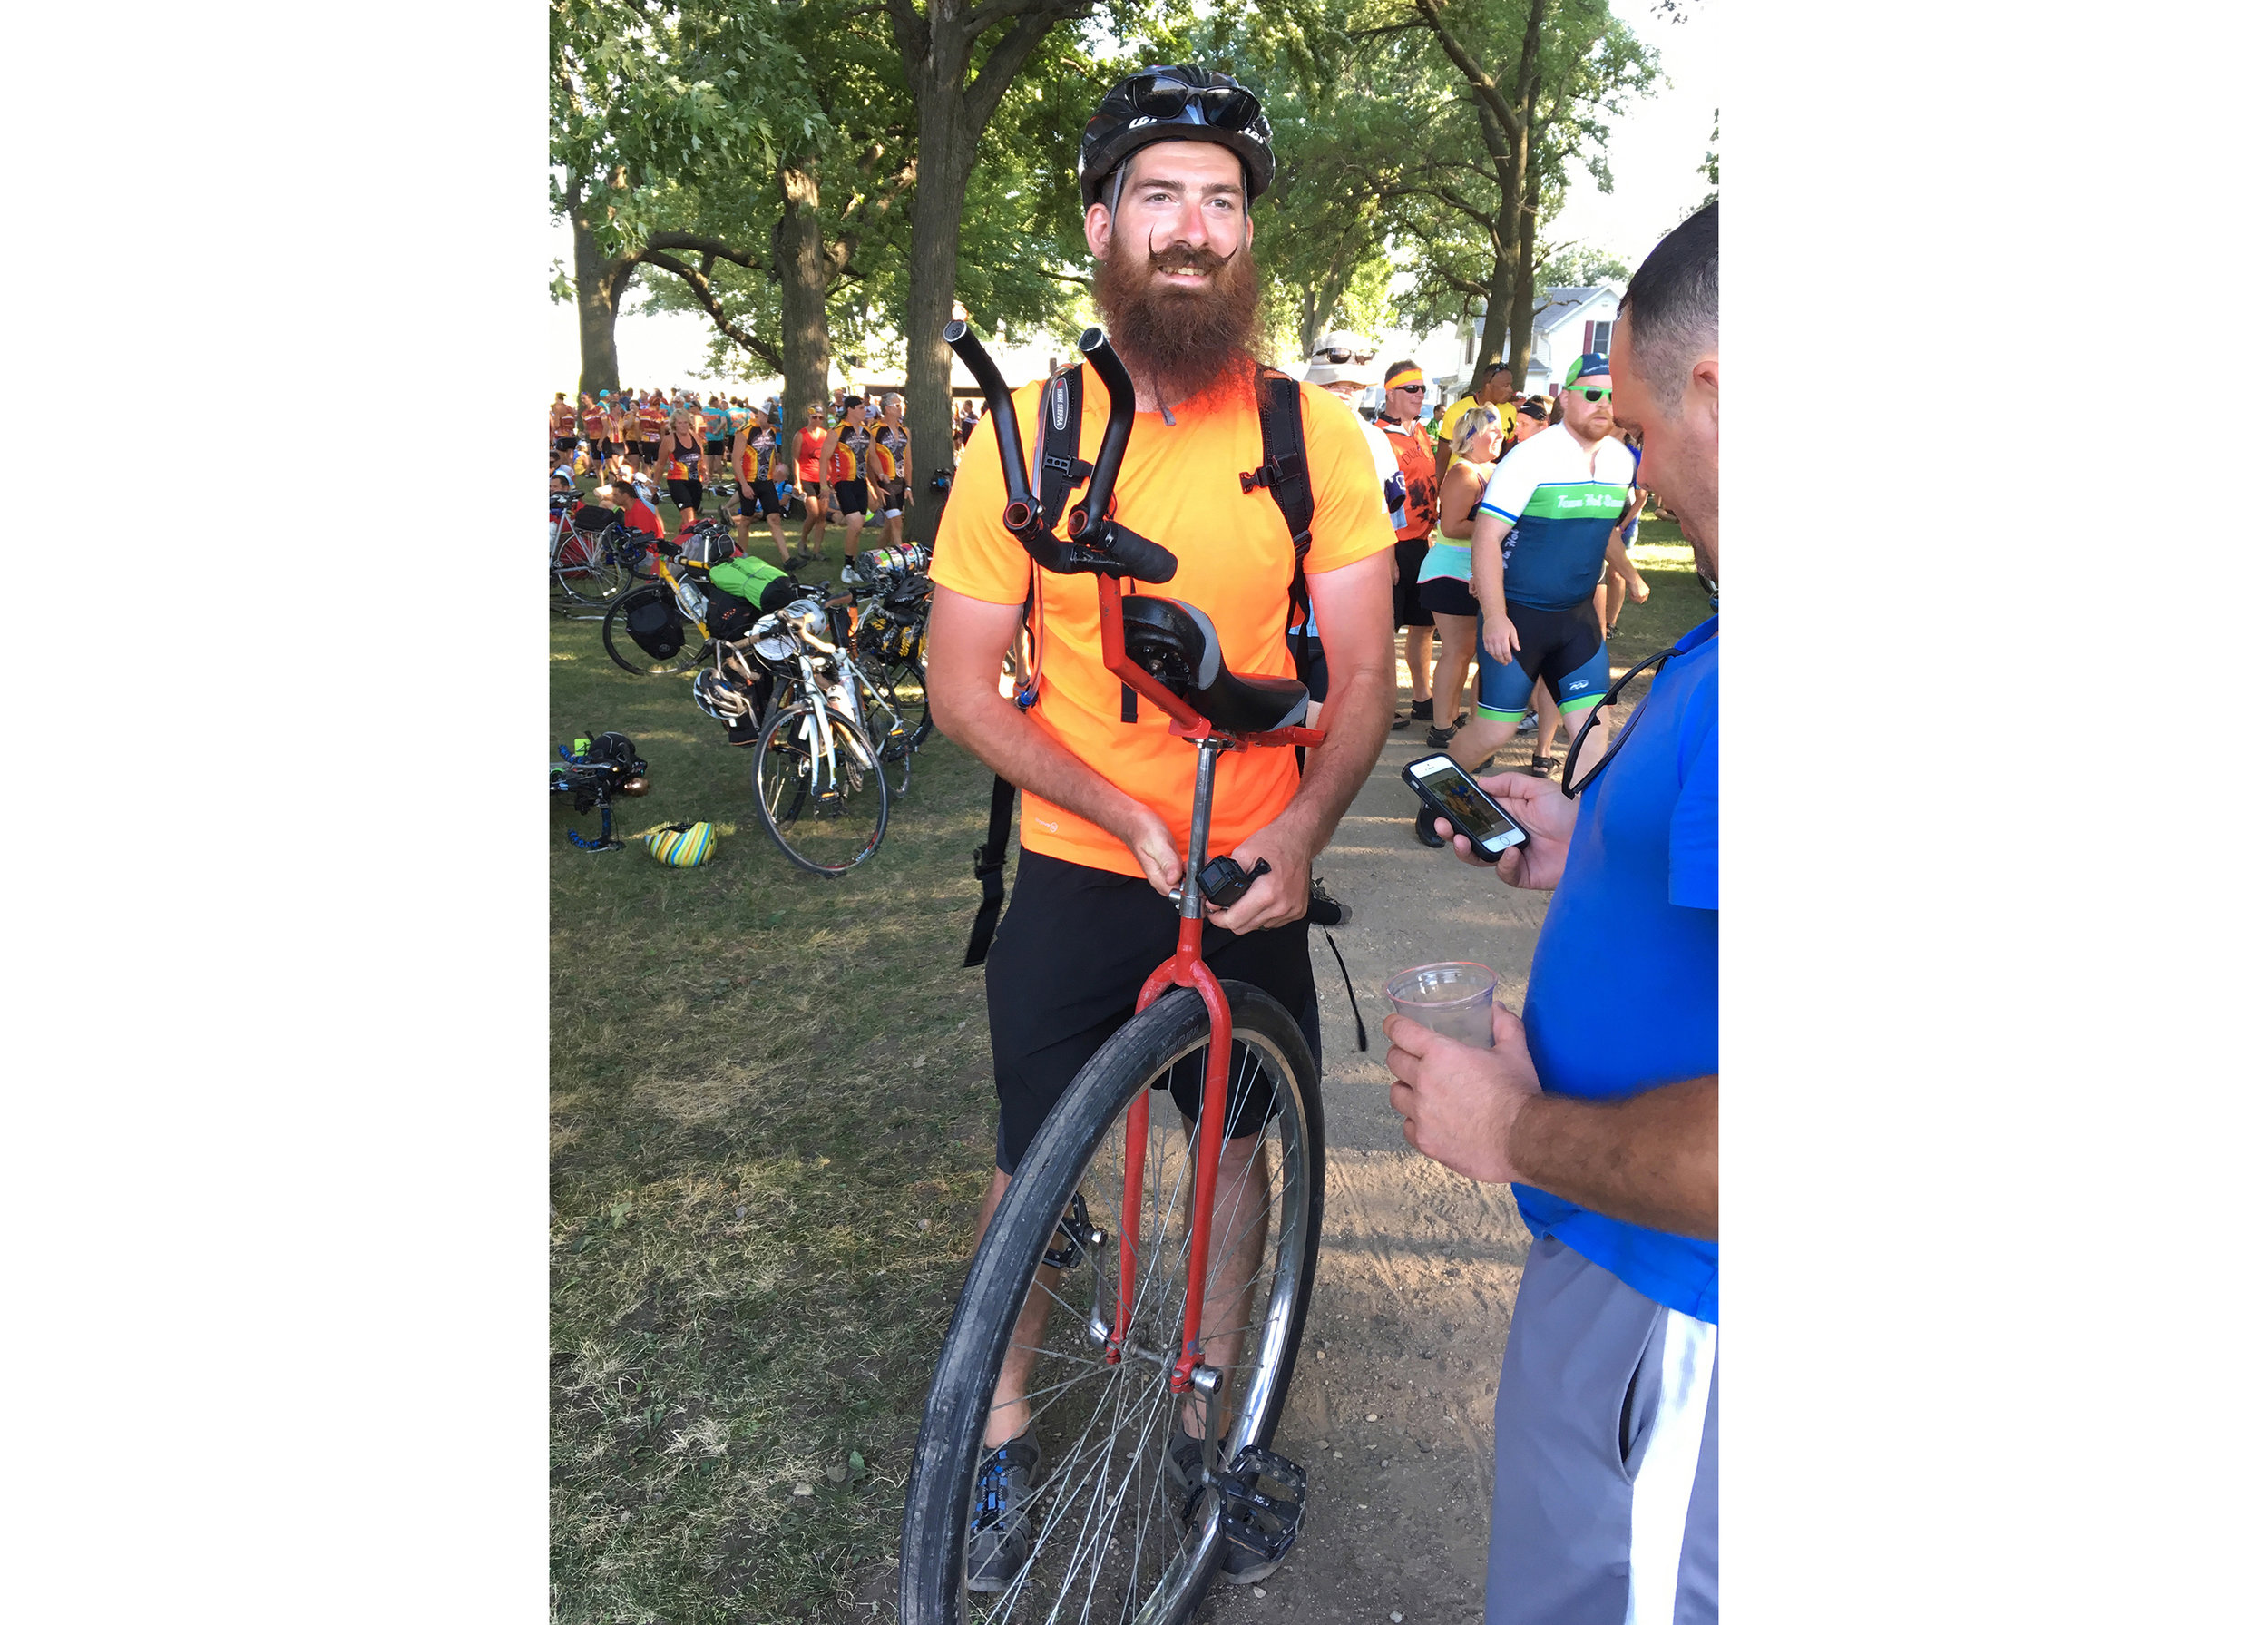  Jason Party, Unicyclist —&nbsp;Mr Party (an appropriate name for RAGBRAI) rides the entire route on his unicycle. When asked what was the most difficult thing about riding a unicycle, Jason replied, "Going downhill." 2017 marked Jason's 9th RAGBRAI 